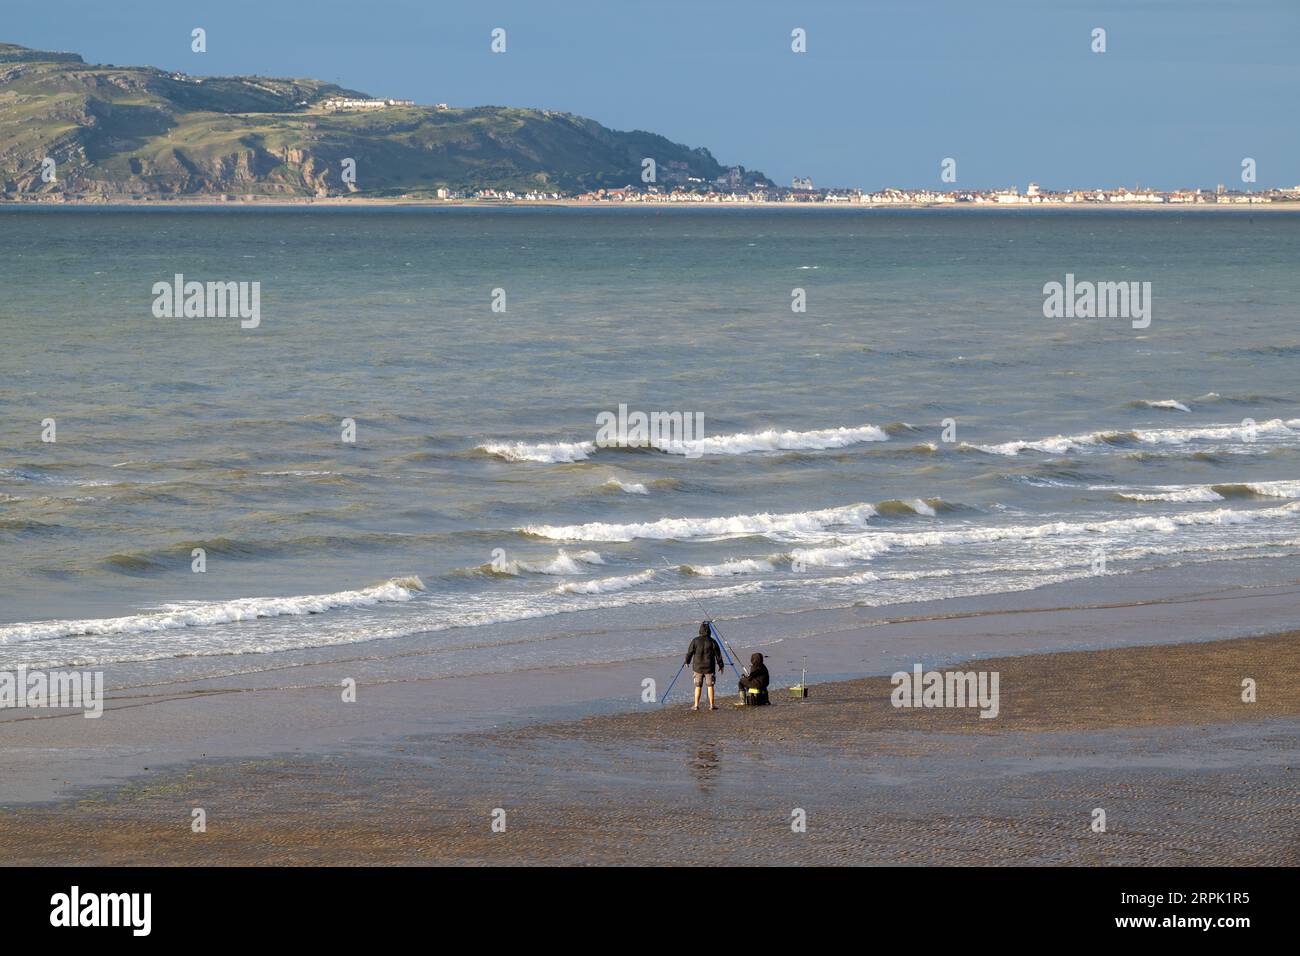 People fishing on the beach in North Wales, with Landudno and the Great Orme in the backgroup. Wales, UK. Stock Photo